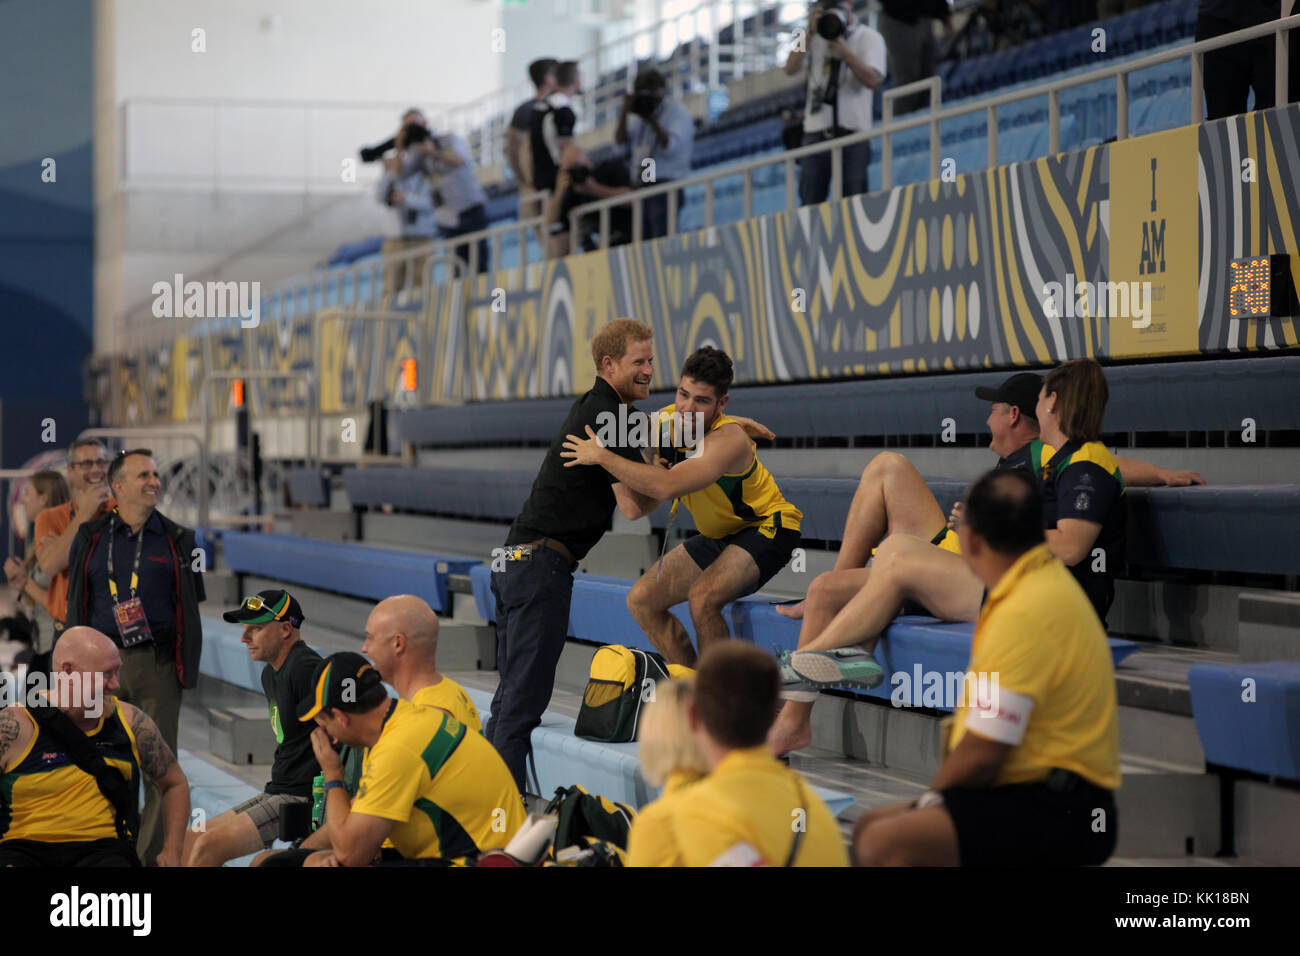 United Kingdom Prince Harry of Wales meets with athletes competing in the Invictus Games at the Toronto Pan Am Sports Centre September 22, 2017 in Toronto, Canada. The Invictus Games is an international Paralympic-style event for injured or sick military personnel and veterans. (photo by Daniel Luksan  via Planetpix) Stock Photo